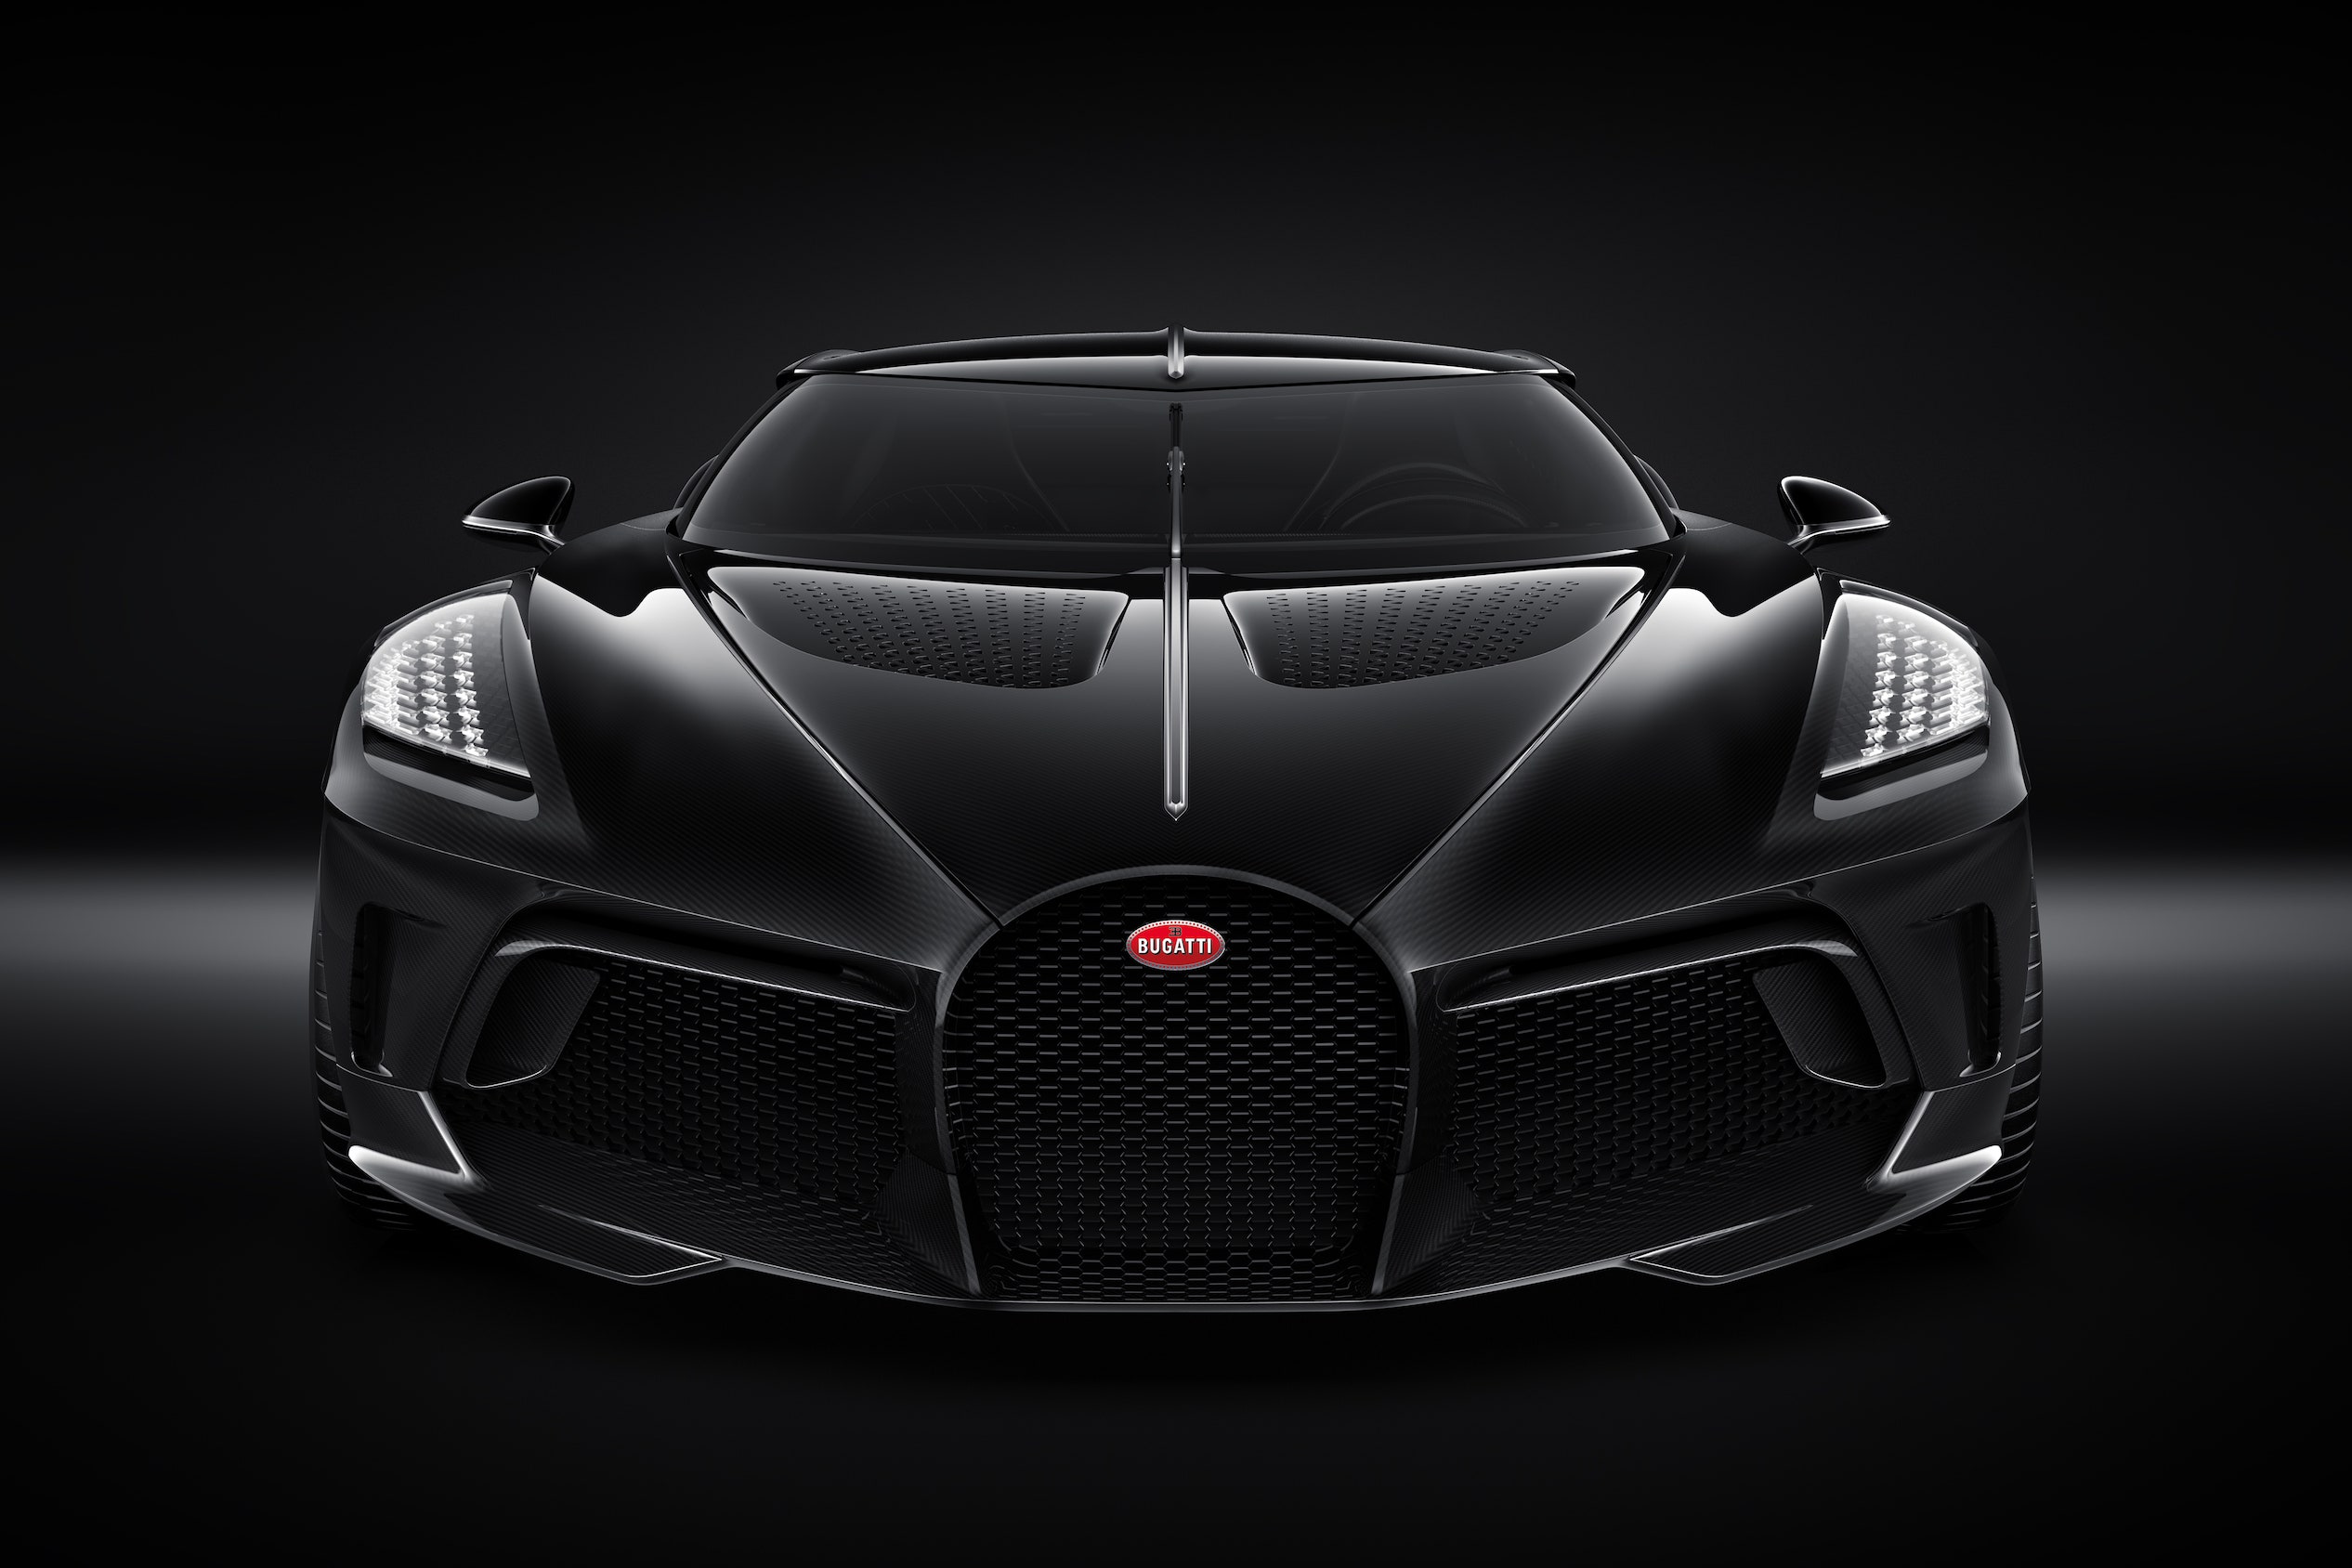 Detail Images Of Bugatti Cars Nomer 8